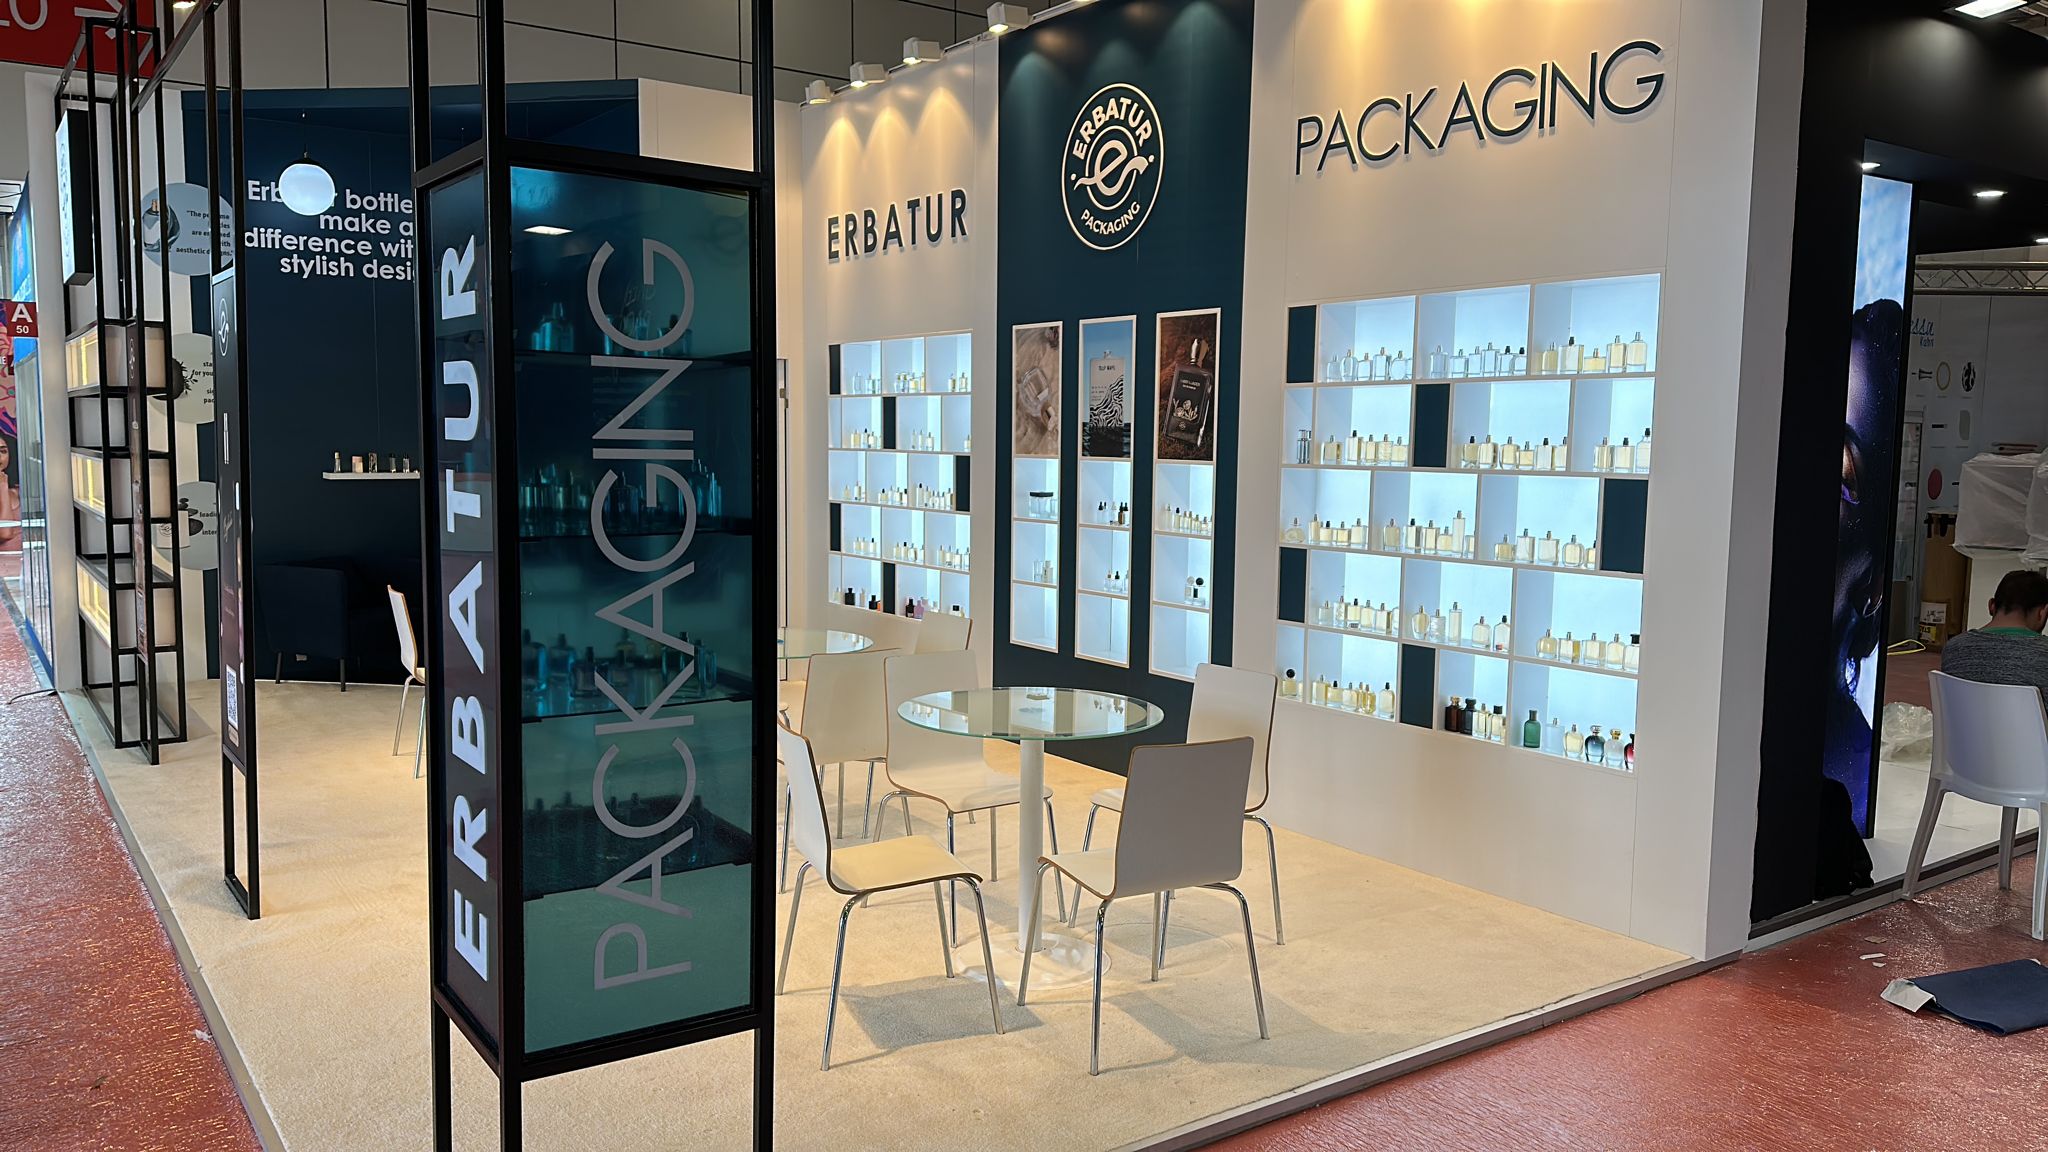 Erbatur Glass Packaging Stands Out at Cosmoprof Bologna Fair